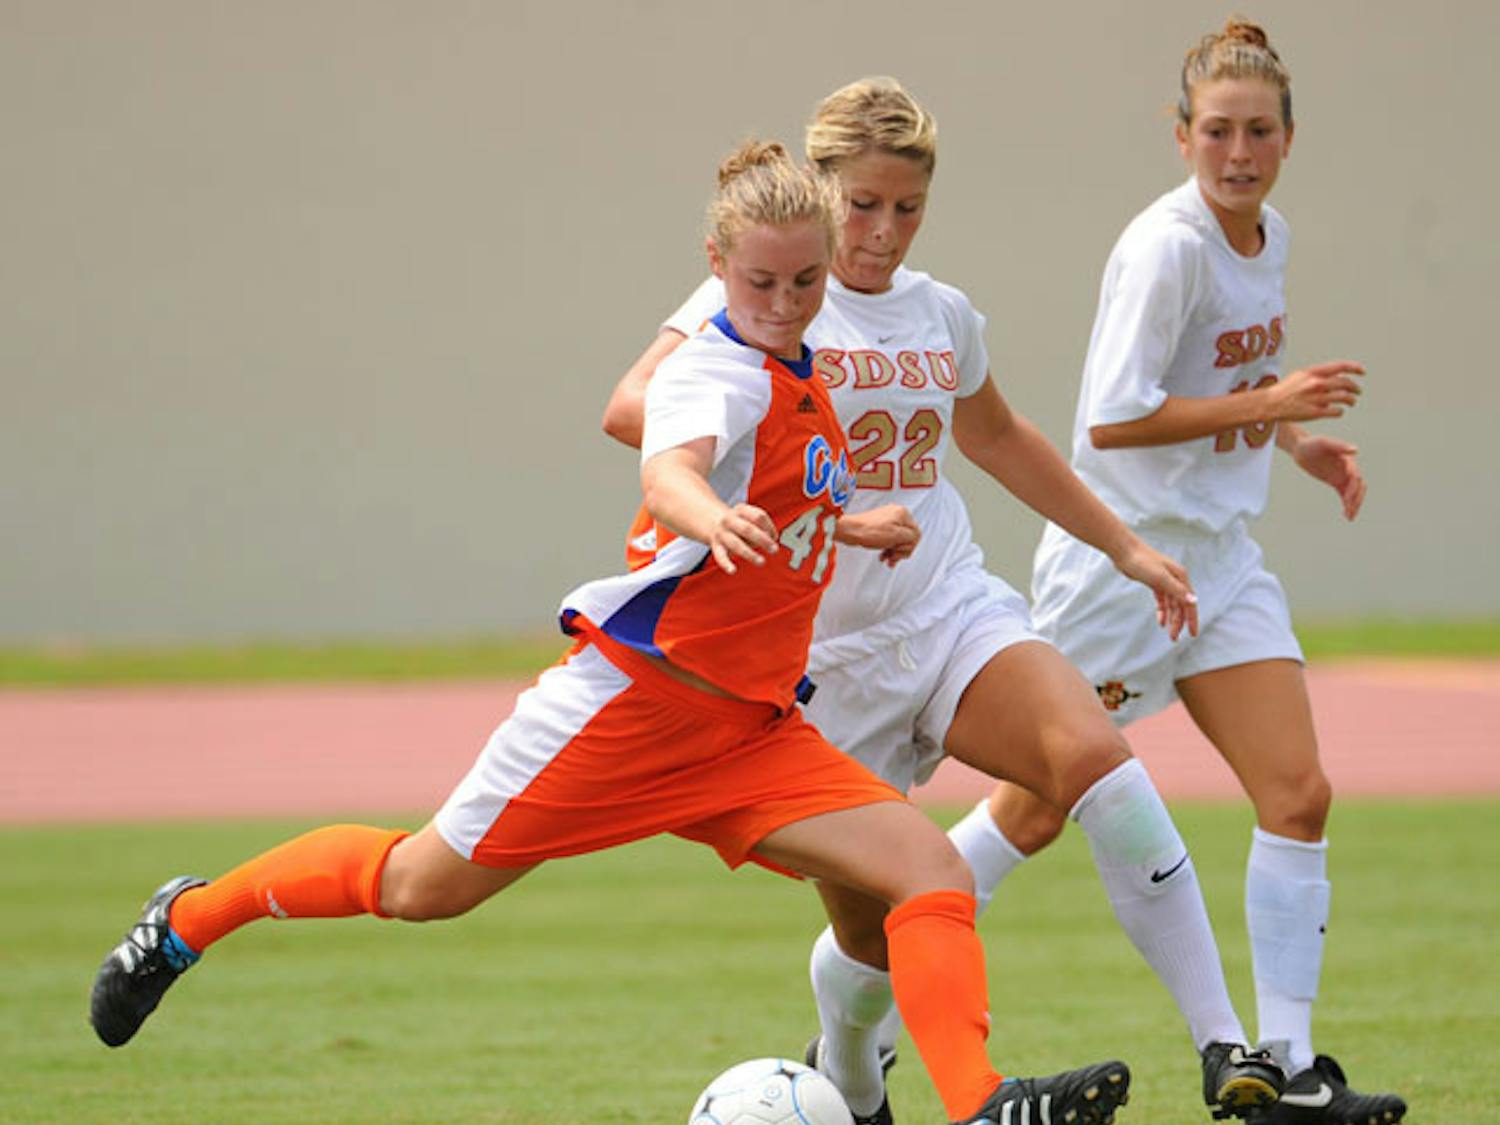 The 2010
Southeastern Conference Freshman of the Year, forward Taylor Travis
scored a goal and notched an assist in Florida’s 2-0 shutout of
Miami on Friday.